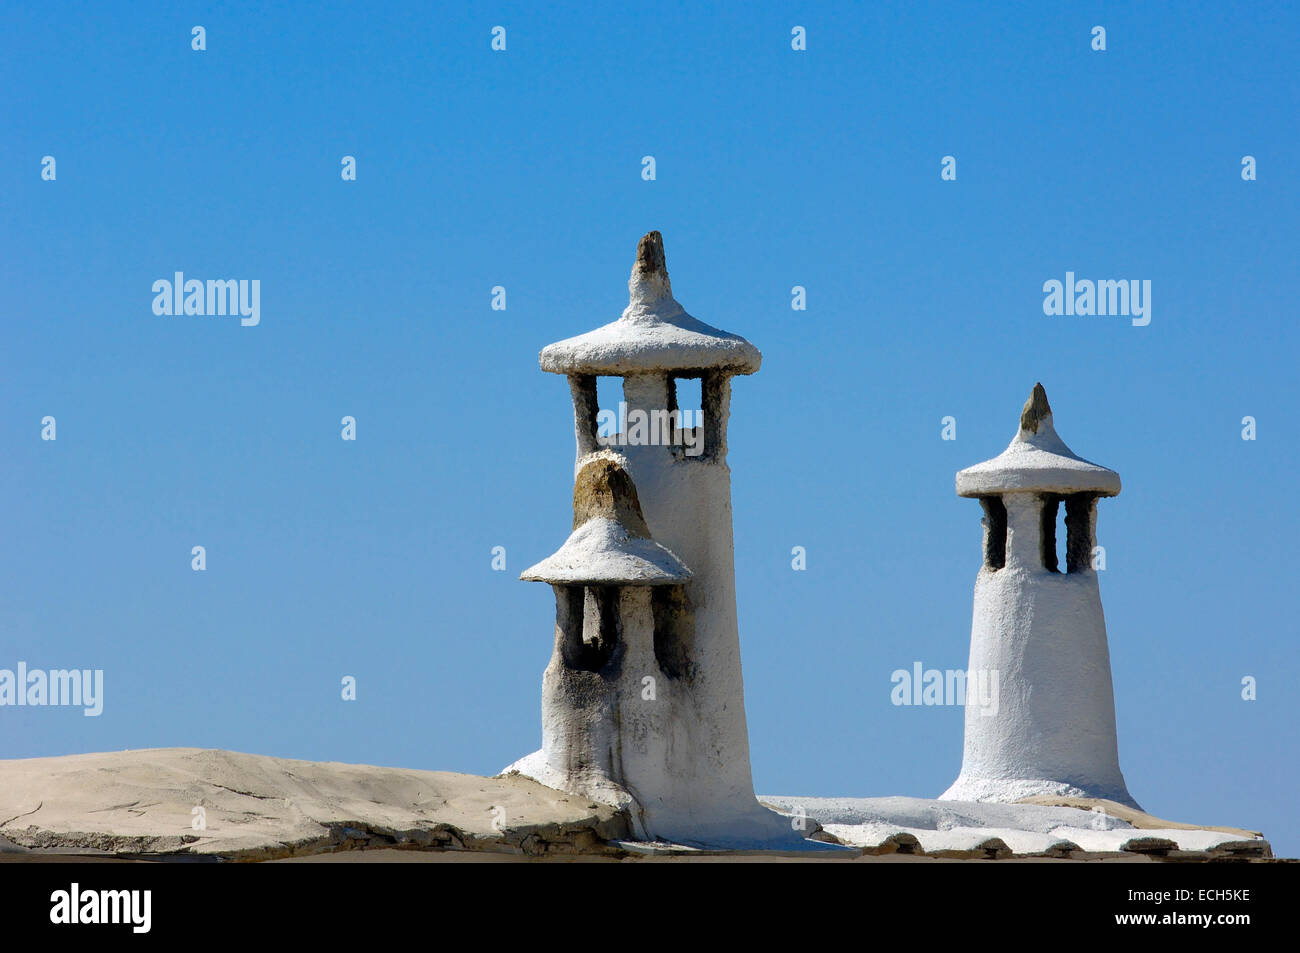 Typical roof with chimneys, Portugos, Alpujarras, Granada province, Andalusia, Spain, Europe Stock Photo